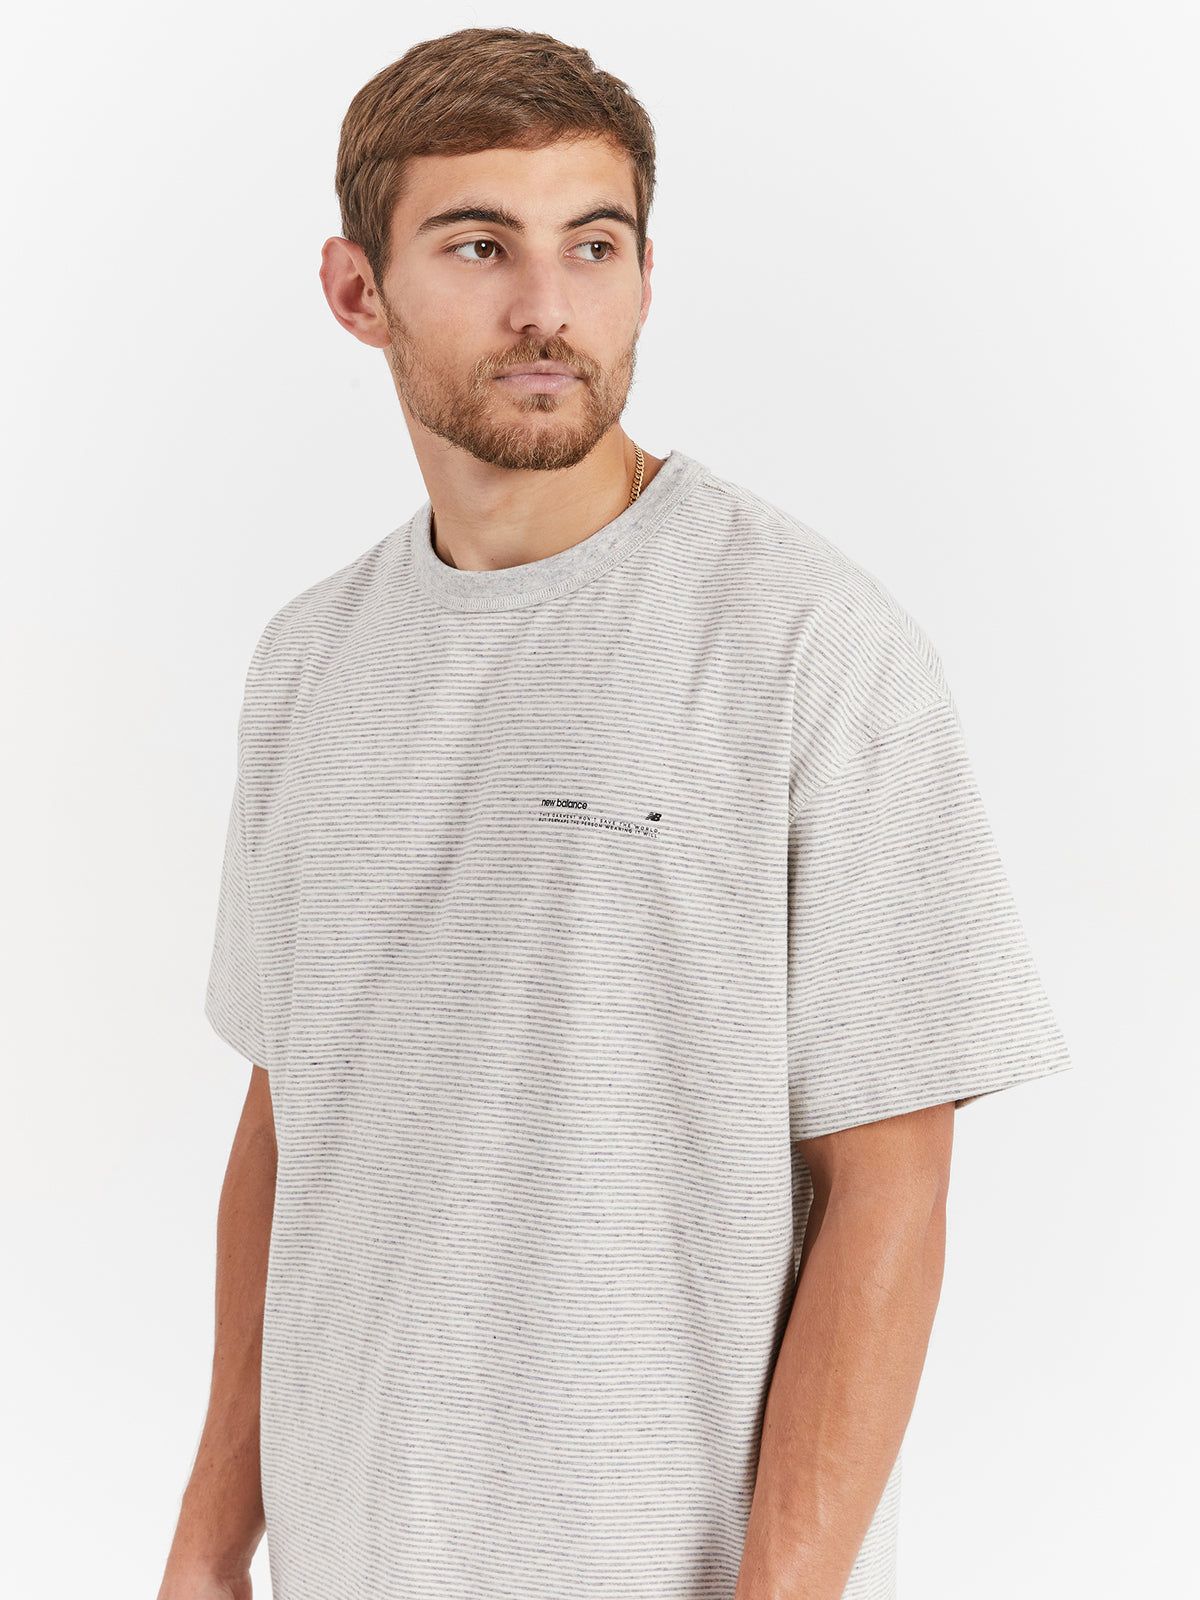 NB Athletics Undyed T-Shirt in Striped Griege